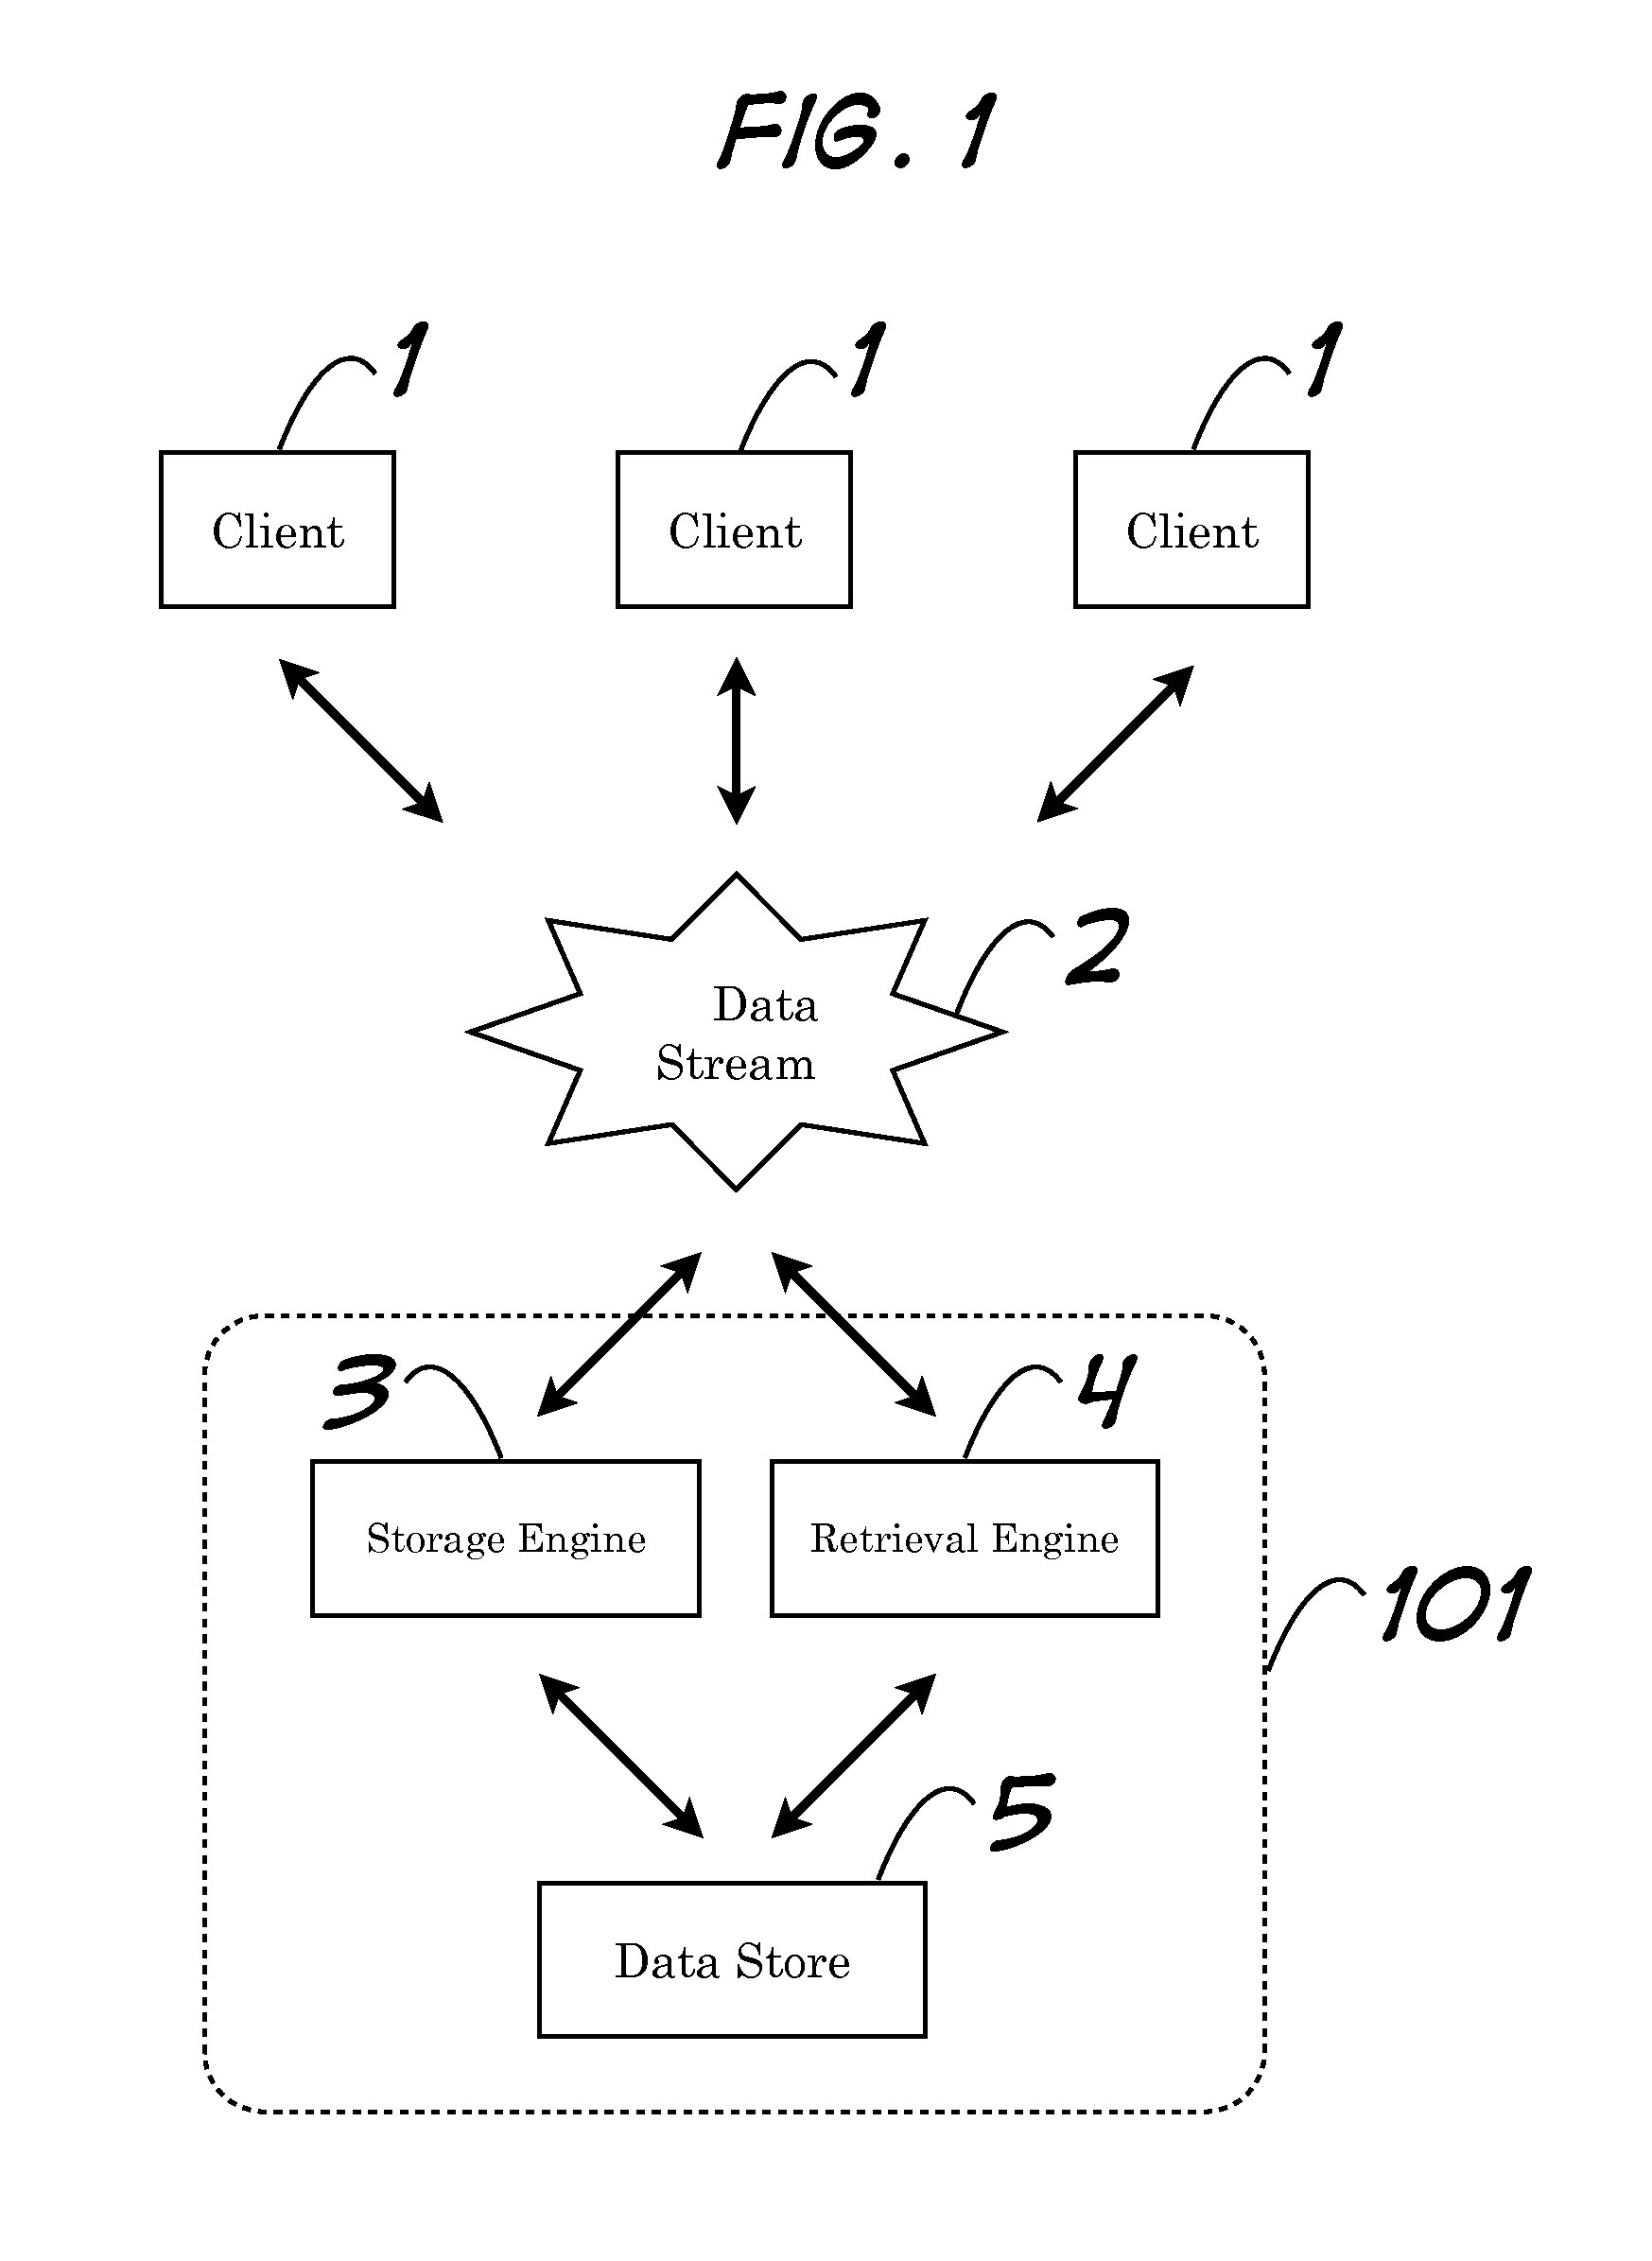 Storage of Arbitrary Points in N-Space and Retrieval of Subset Thereof Based on Criteria Including Maximum Distance to an Arbitrary Reference Point